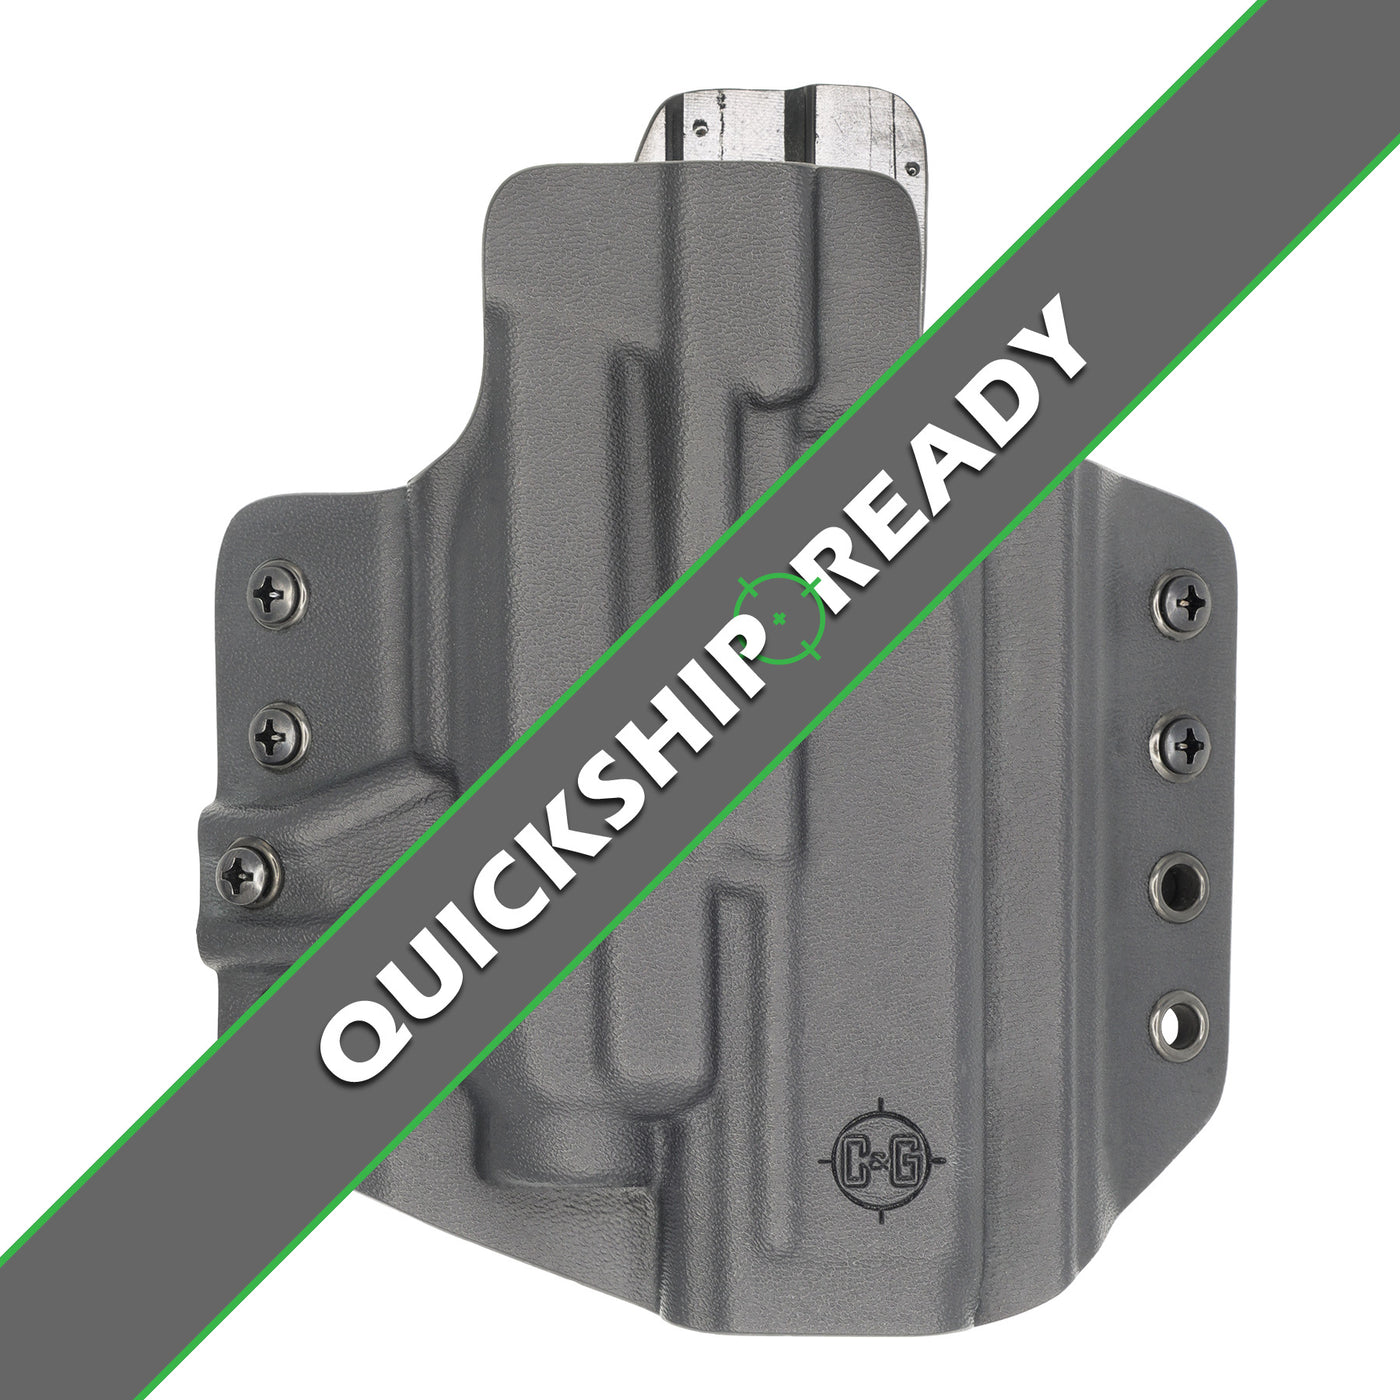 C&G Holsters quickship OWB tactical OZ9/c streamlight tlr7/a